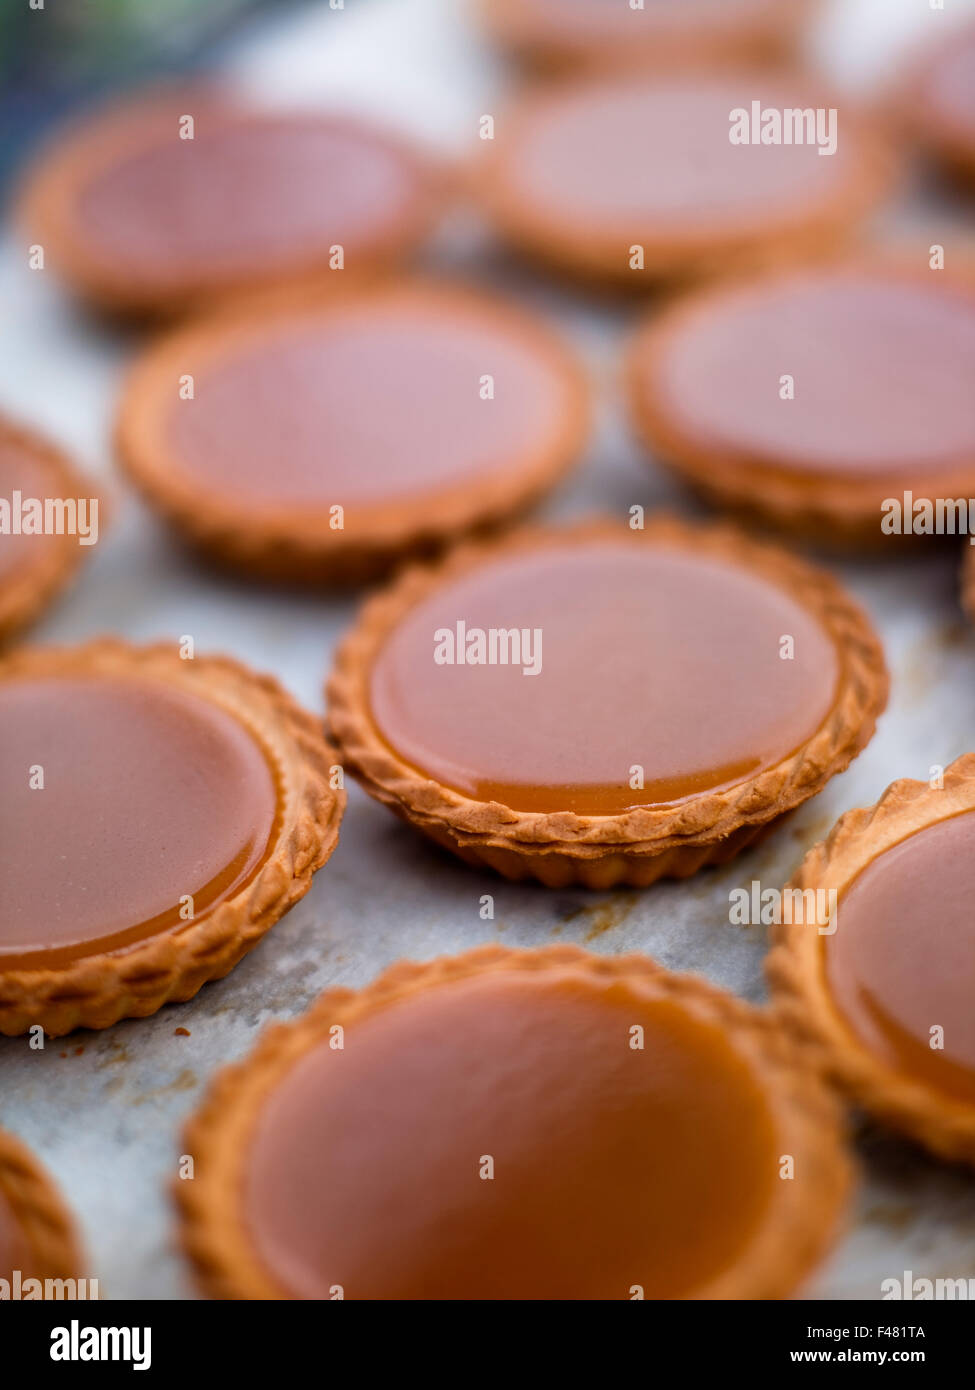 Pies, close-up, Sweden. Stock Photo